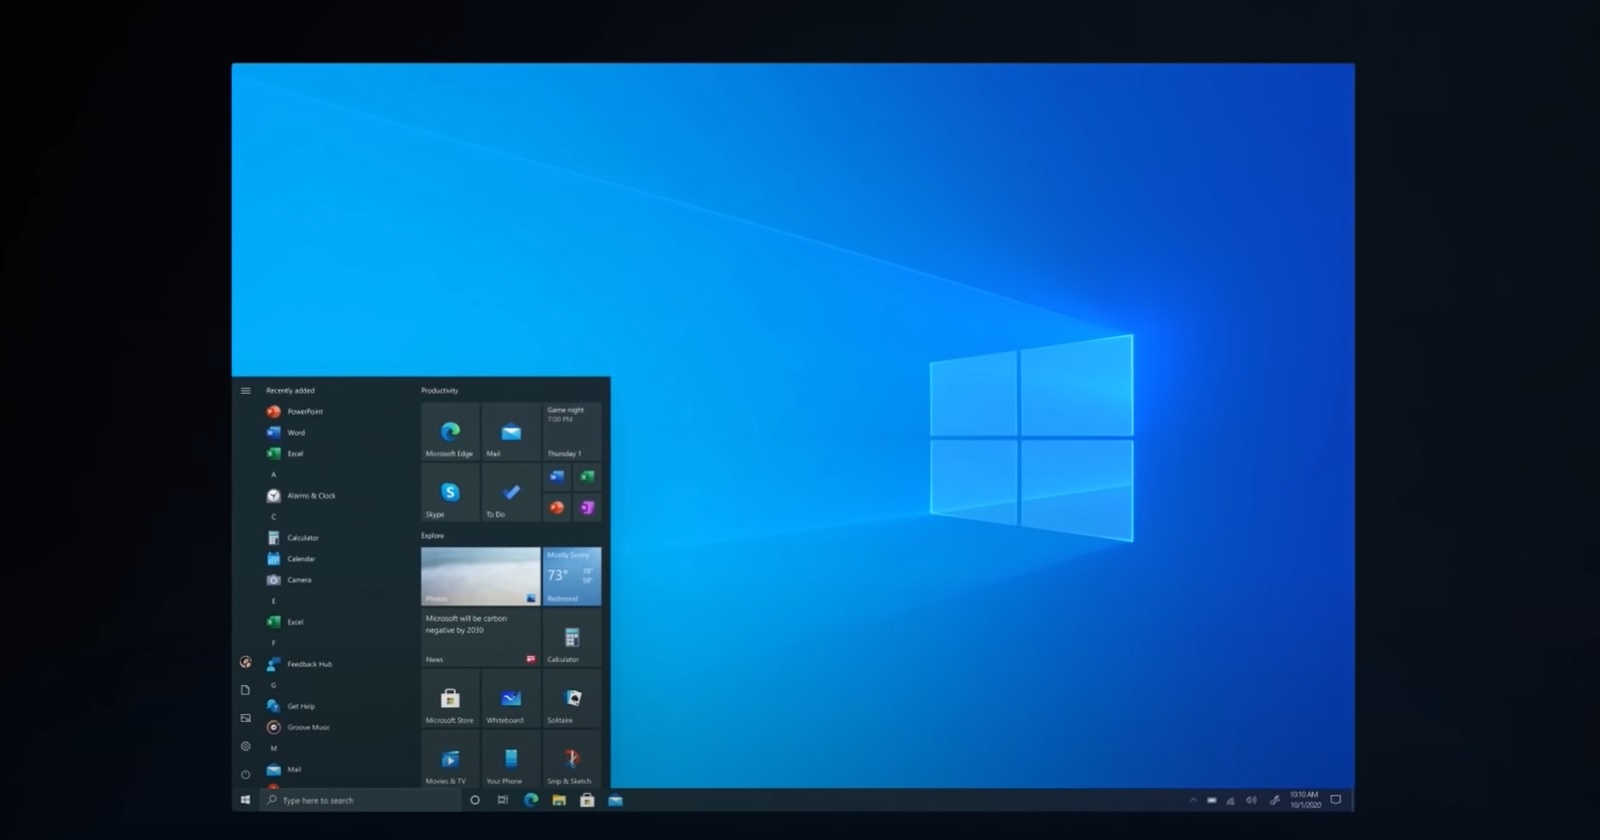 Microsoft seemingly quite ready to release Windows 11 23H2 as ISO